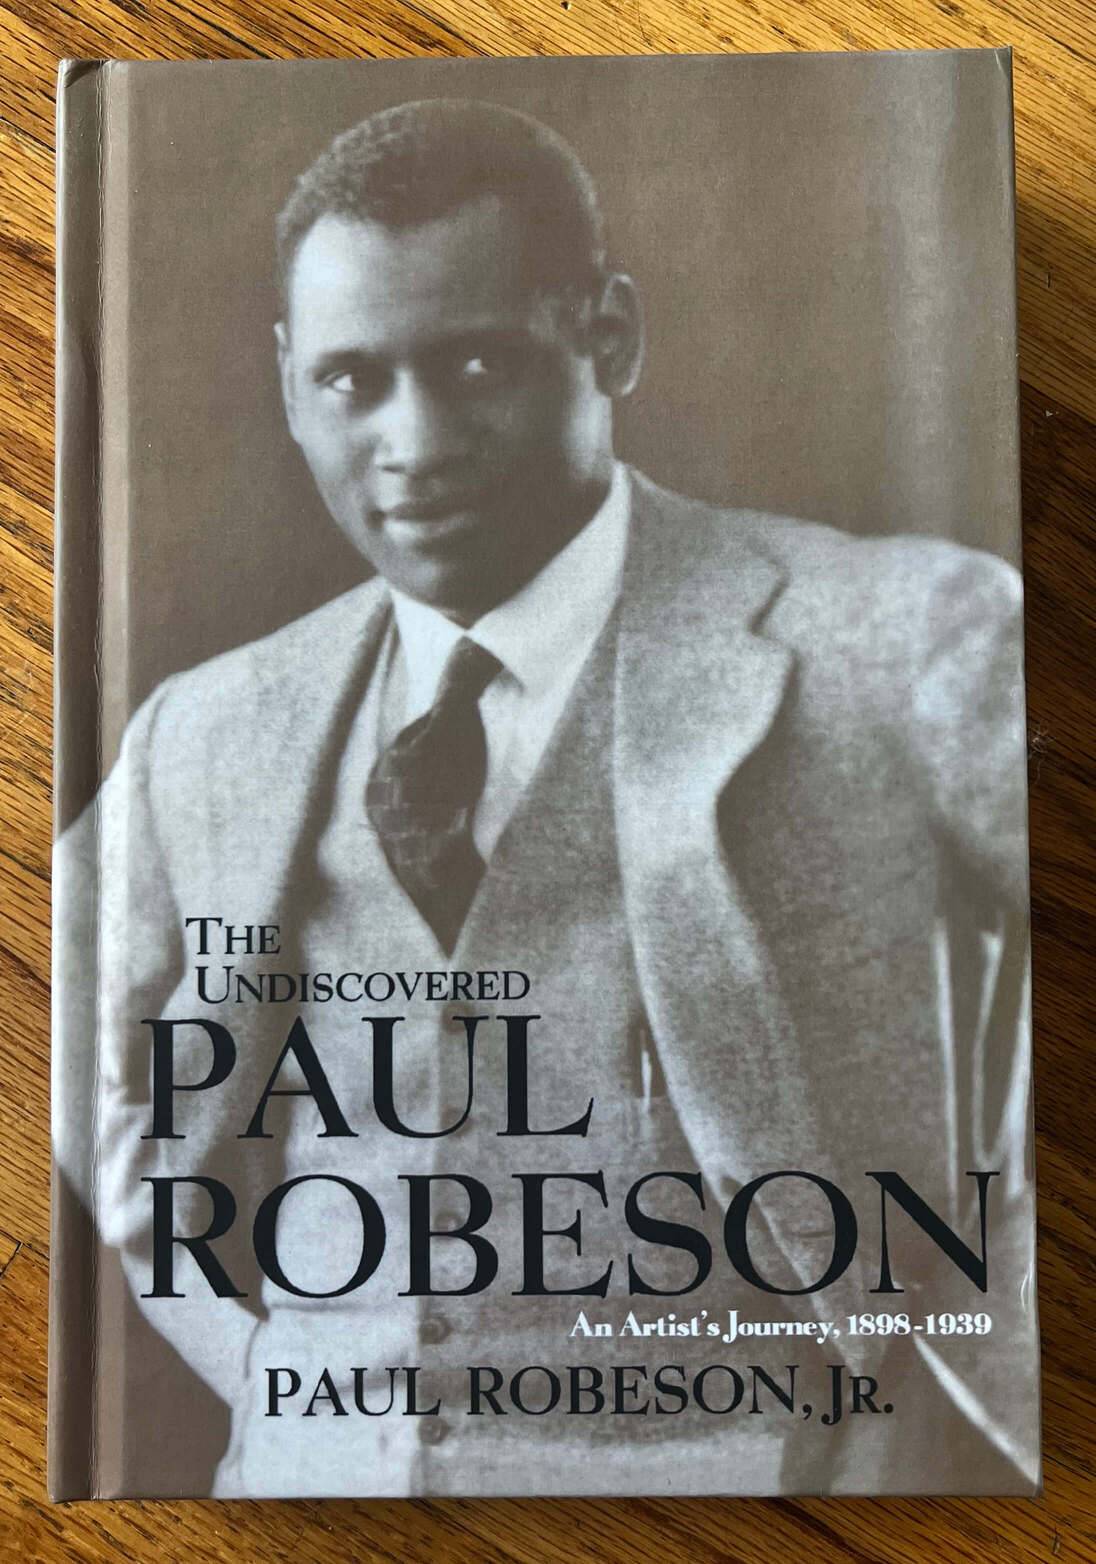 “The Undiscovered Paul Robeson: An Artist’s Journey, 1898-1939” by Paul Robeson, Jr.